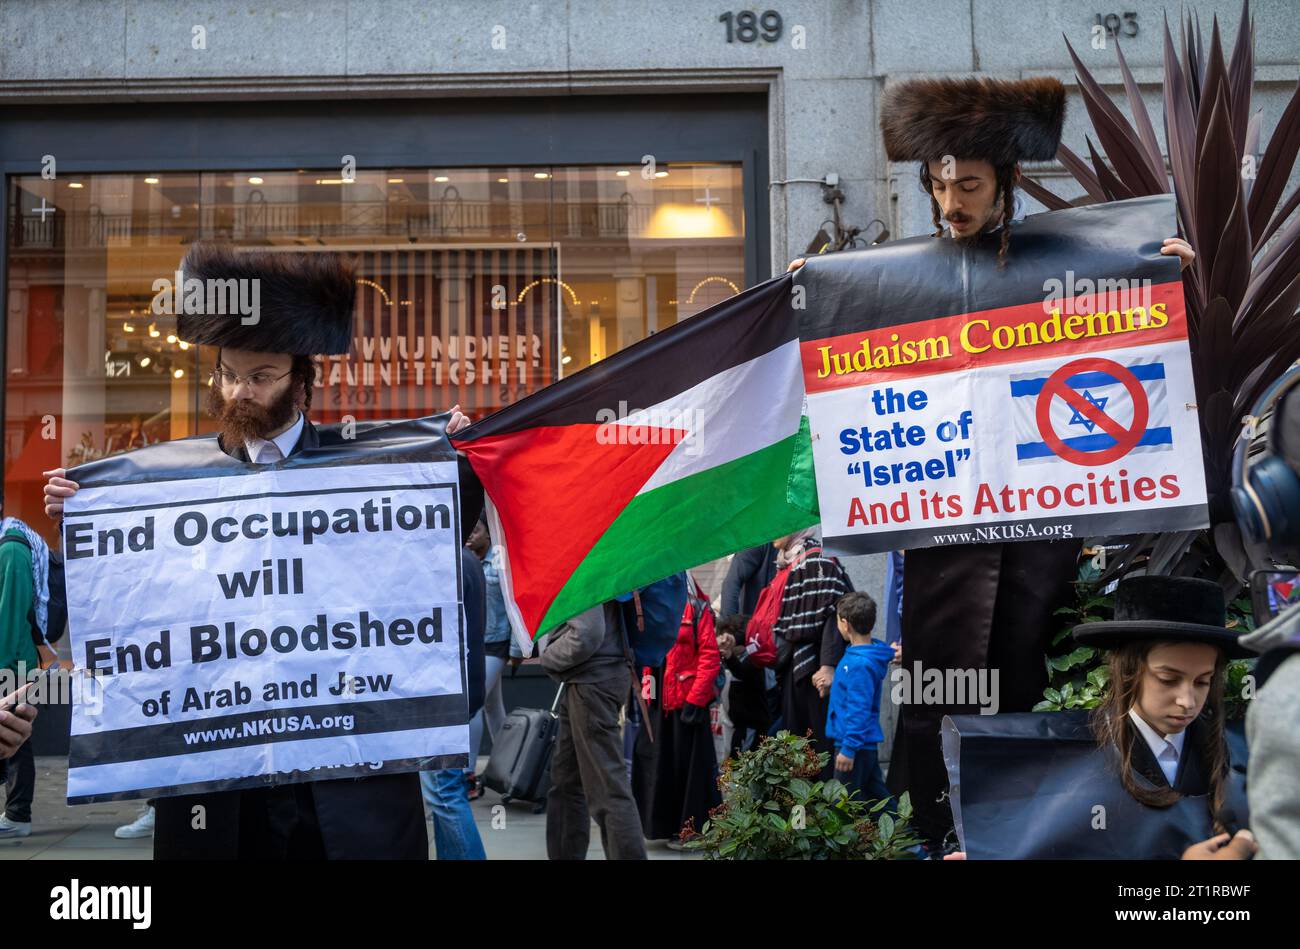 London, UK. 14 Oct 2023: Men from the anti-Zionist Haredi Jewish group Neturei Karta, or Guardians of the City, protest in support of Palestine and ag Stock Photo